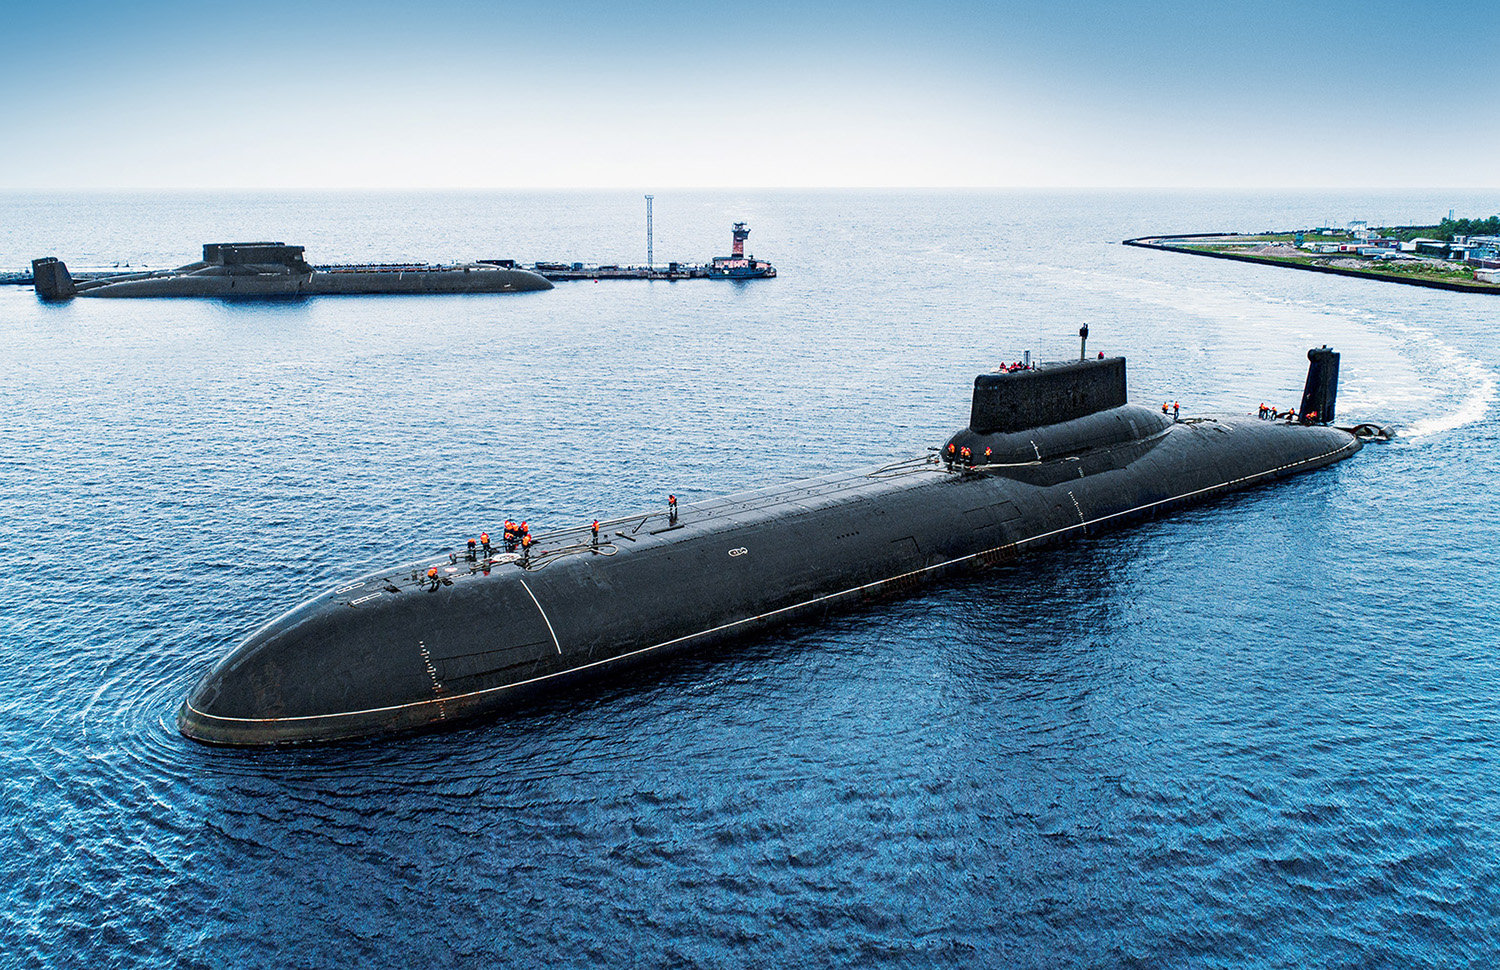 The world's largest nuclear submarine is being scrapped in russia